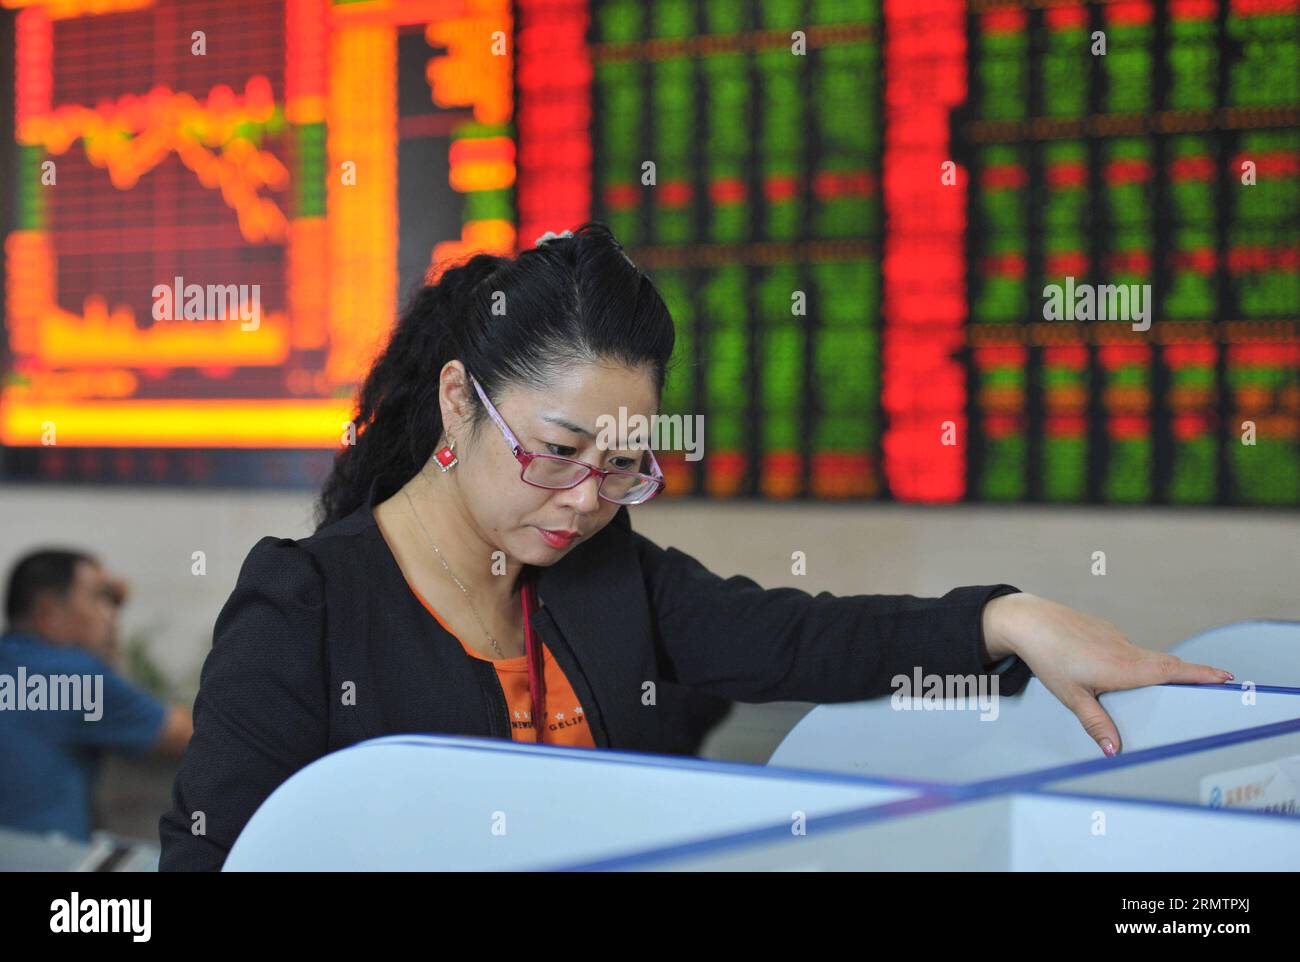 An investor reads stock information at a trading hall of a securities firm in Fuyang City, east China s Anhui Province, Sept. 16, 2014. Chinese shares closed lower on Tuesday, with the benchmark Shanghai Composite Index down 1.82 percent to finish at 2,296.55 points, owing to the plunge of growth enterprises. The smaller Shenzhen Component Index lost 191.57 points, or 2.36 percent, to close at 7,921.07 points. ) (ry) CHINA-STOCK-DROP (CN) LuxQijian PUBLICATIONxNOTxINxCHN   to Investor reads Stick Information AT a Trading Hall of a Securities Firm in Fuyang City East China S Anhui Province Sept Stock Photo